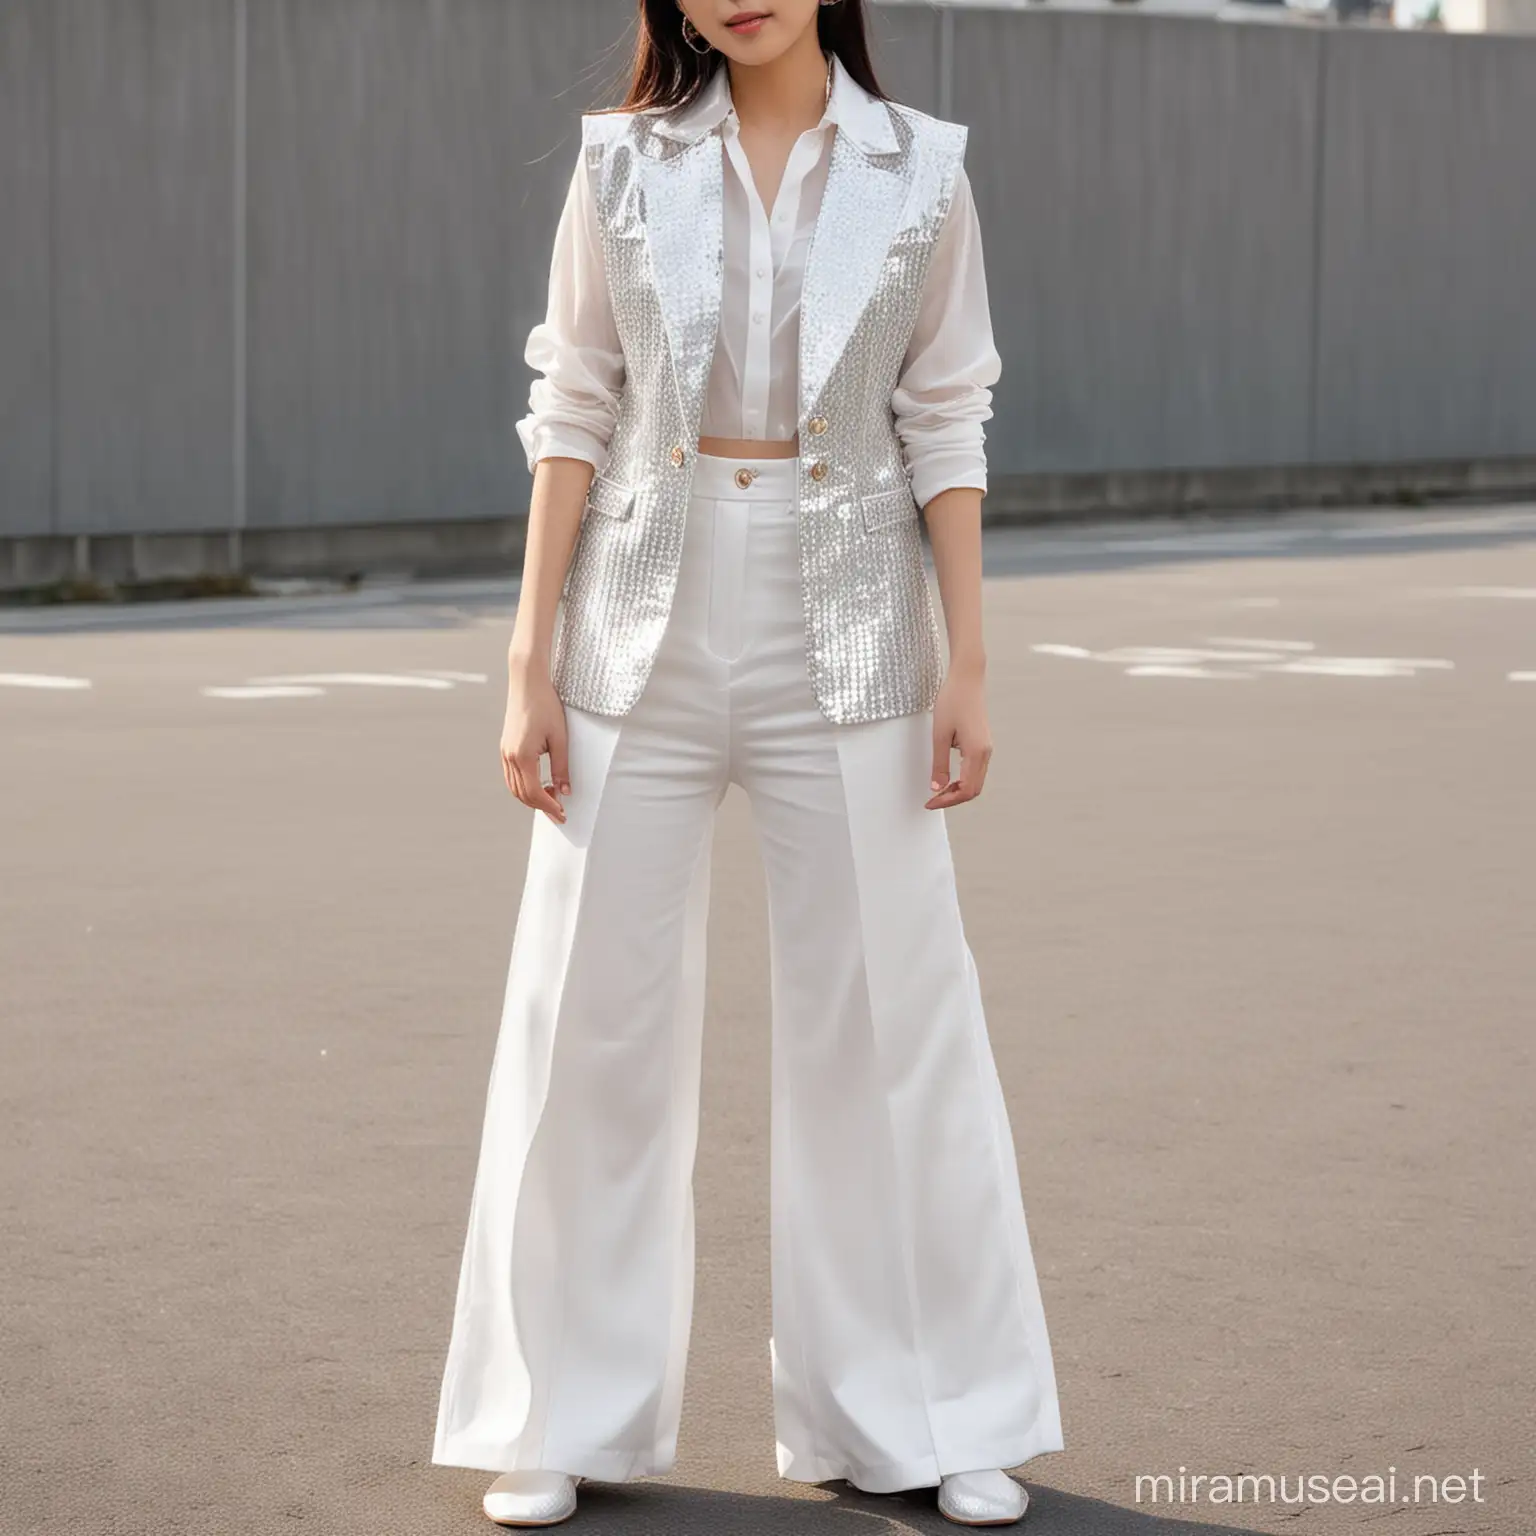 Japanese Girl in Sparkling White Outfit